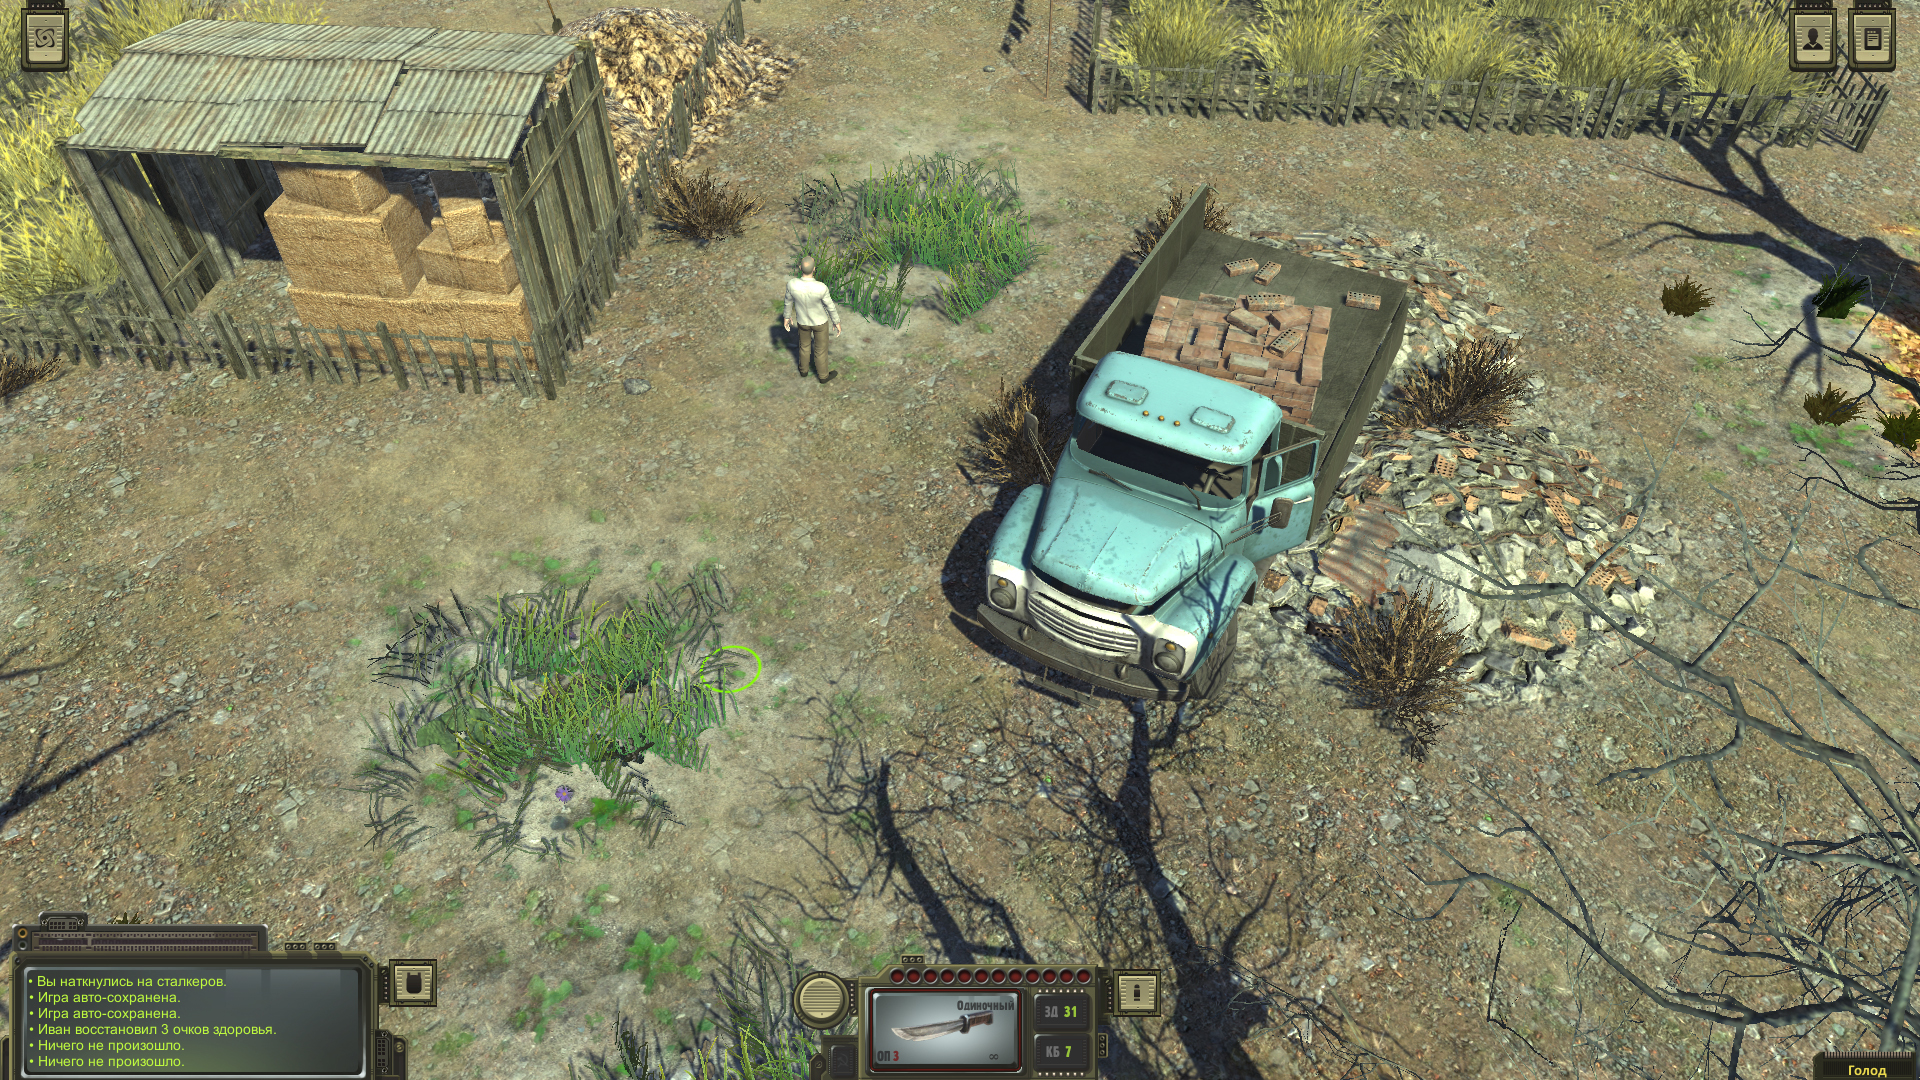 download atom rpg post apocalyptic for free